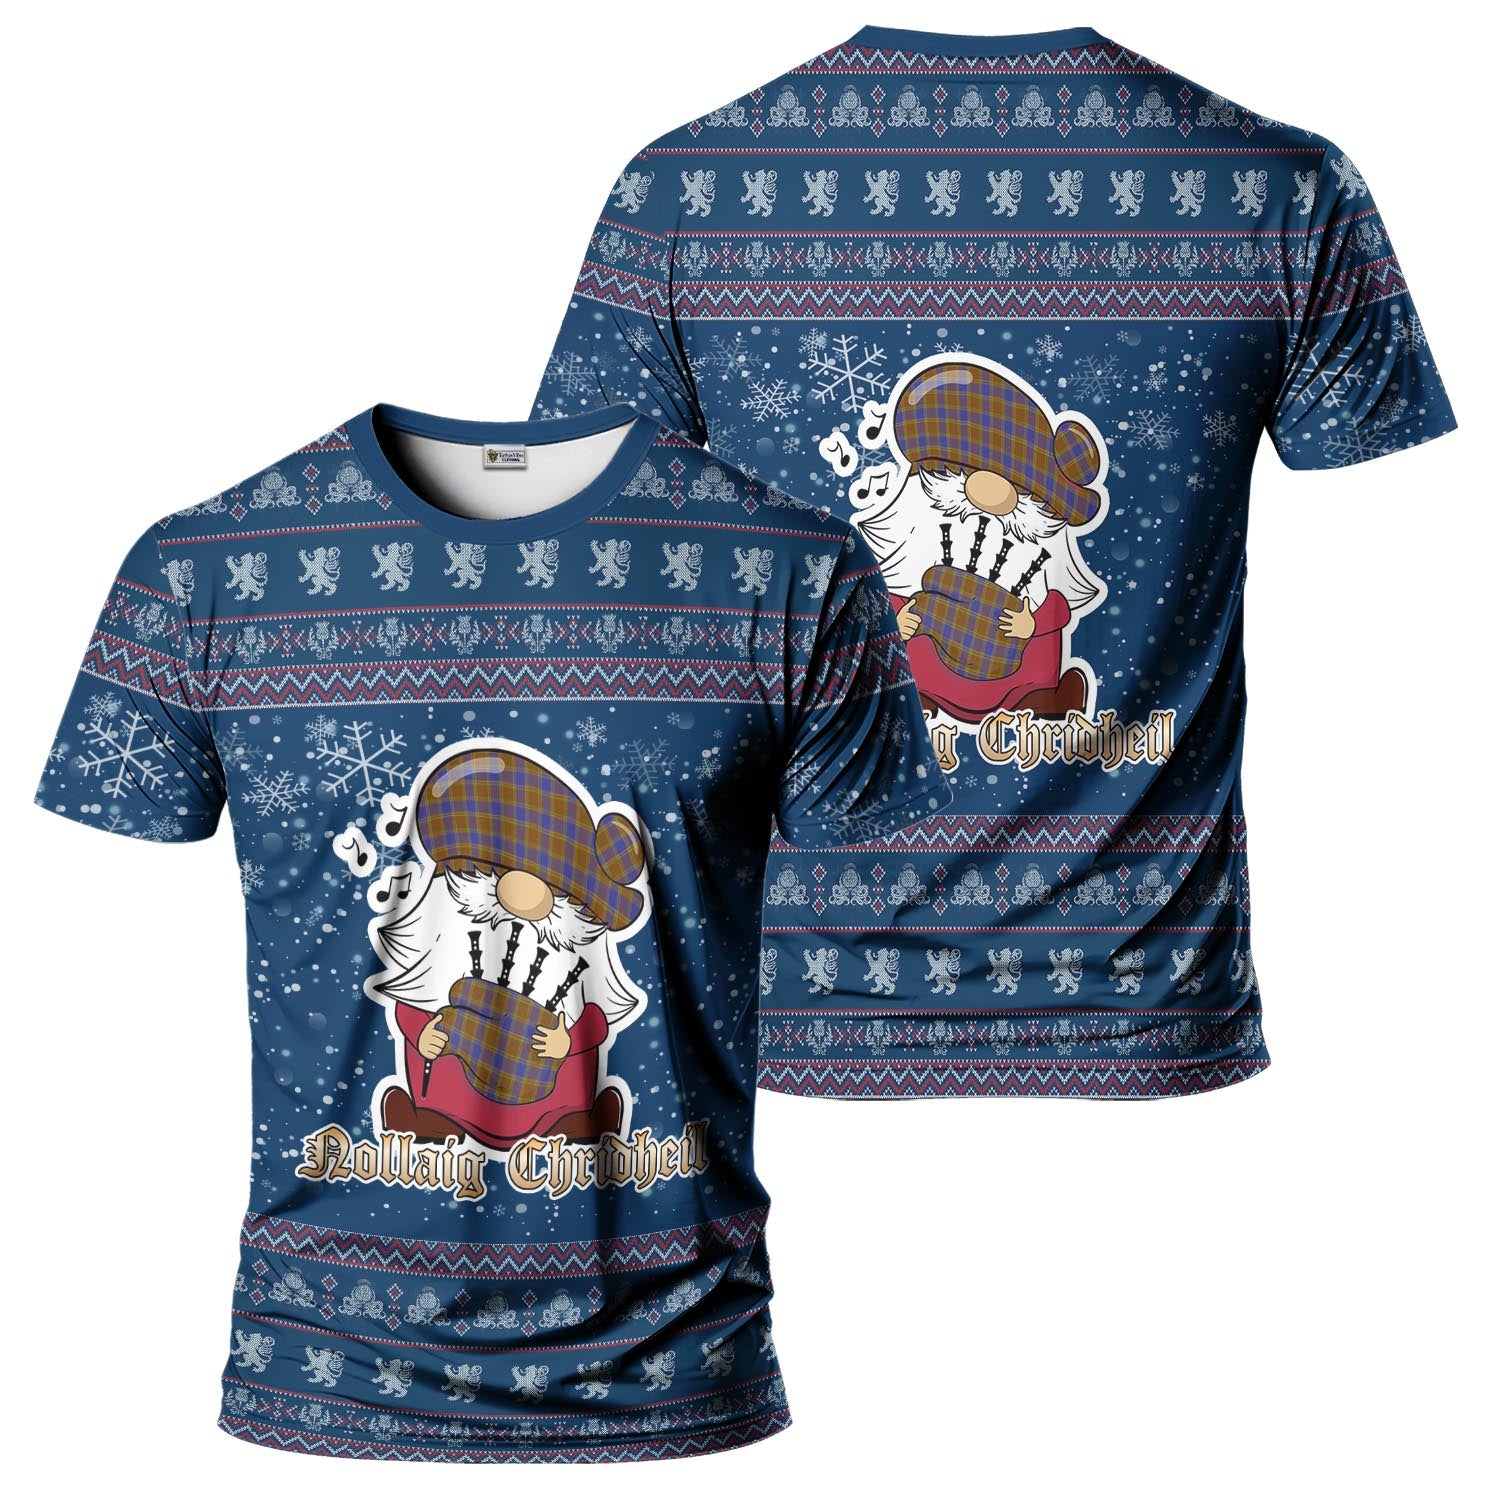 Balfour Modern Clan Christmas Family T-Shirt with Funny Gnome Playing Bagpipes Kid's Shirt Blue - Tartanvibesclothing